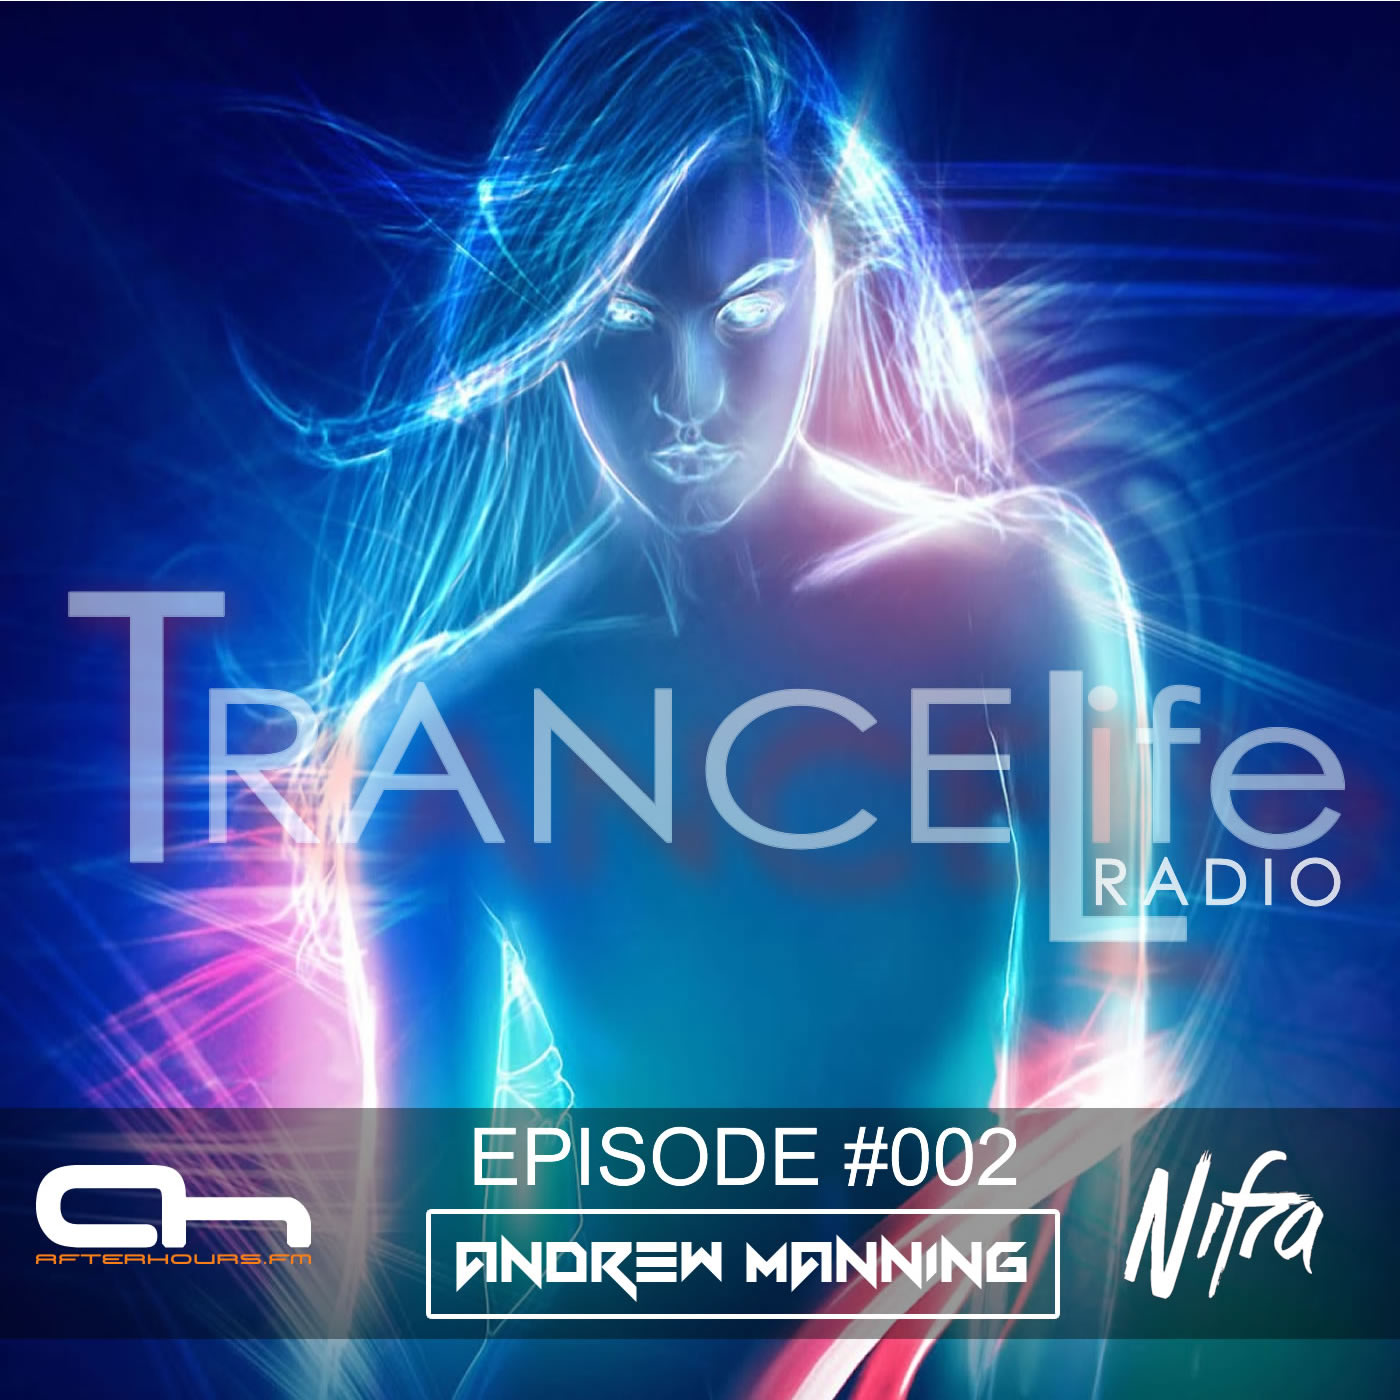 Andrew Manning - TranceLife Radio 002 with guest Nifra (Full Show)